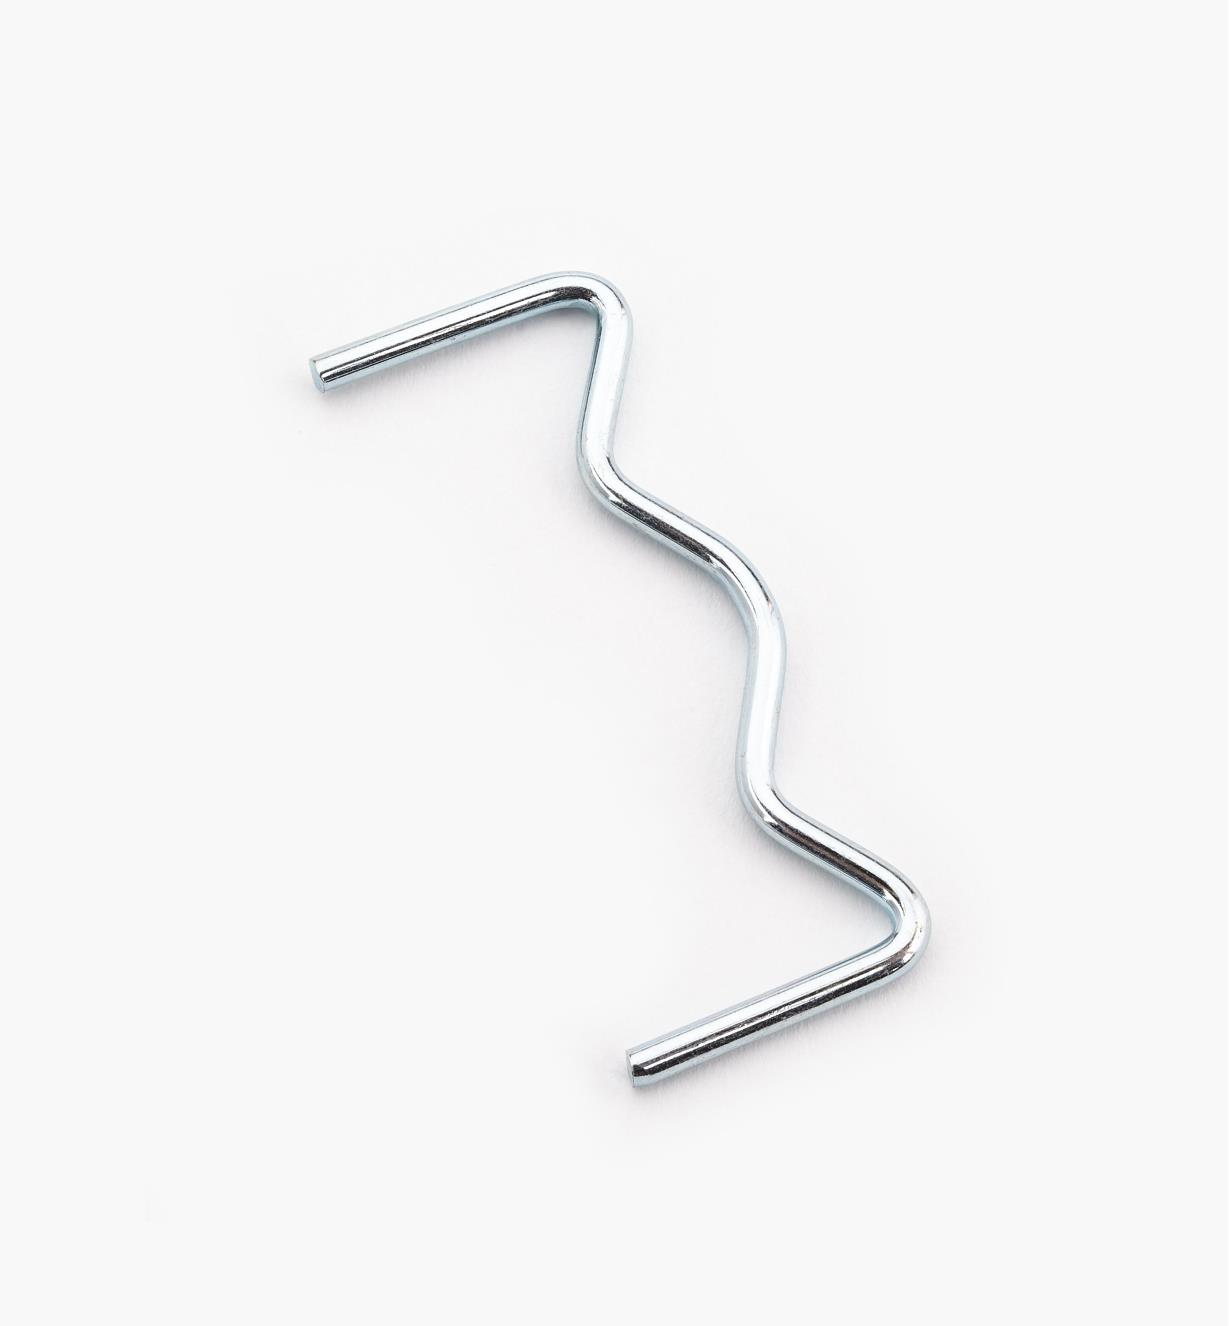 00S0551 - 57mm (2.2") Wire Shelf Supports, pkg. of 10